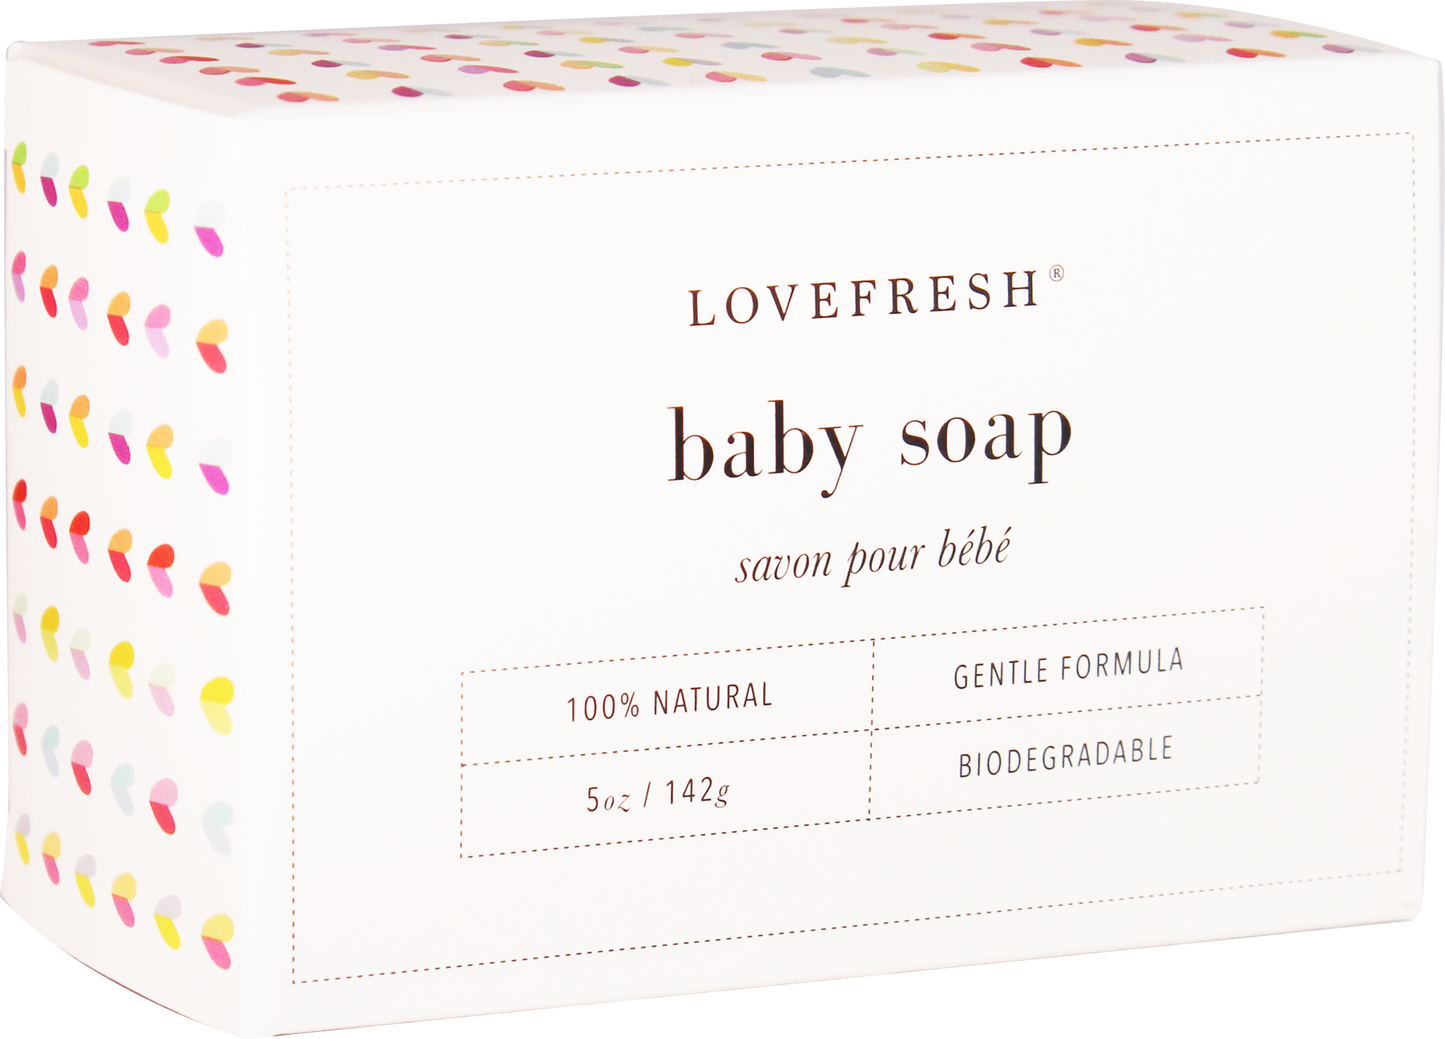 Gentle Formula for babies sensitive skin!  100% Natural, Organic, Biodegradable, Septic Safe, Water Way Safe, Vegan, Gluten Free  Gently cleanses without drying.  Our 100% natural, handmade soaps are made the old fashioned way!  We use nourishing mango butter, shea butter, castor oil, olive oil and of course organic essential oils. Only the good stuff for you guys. All Natural Baby Soap.